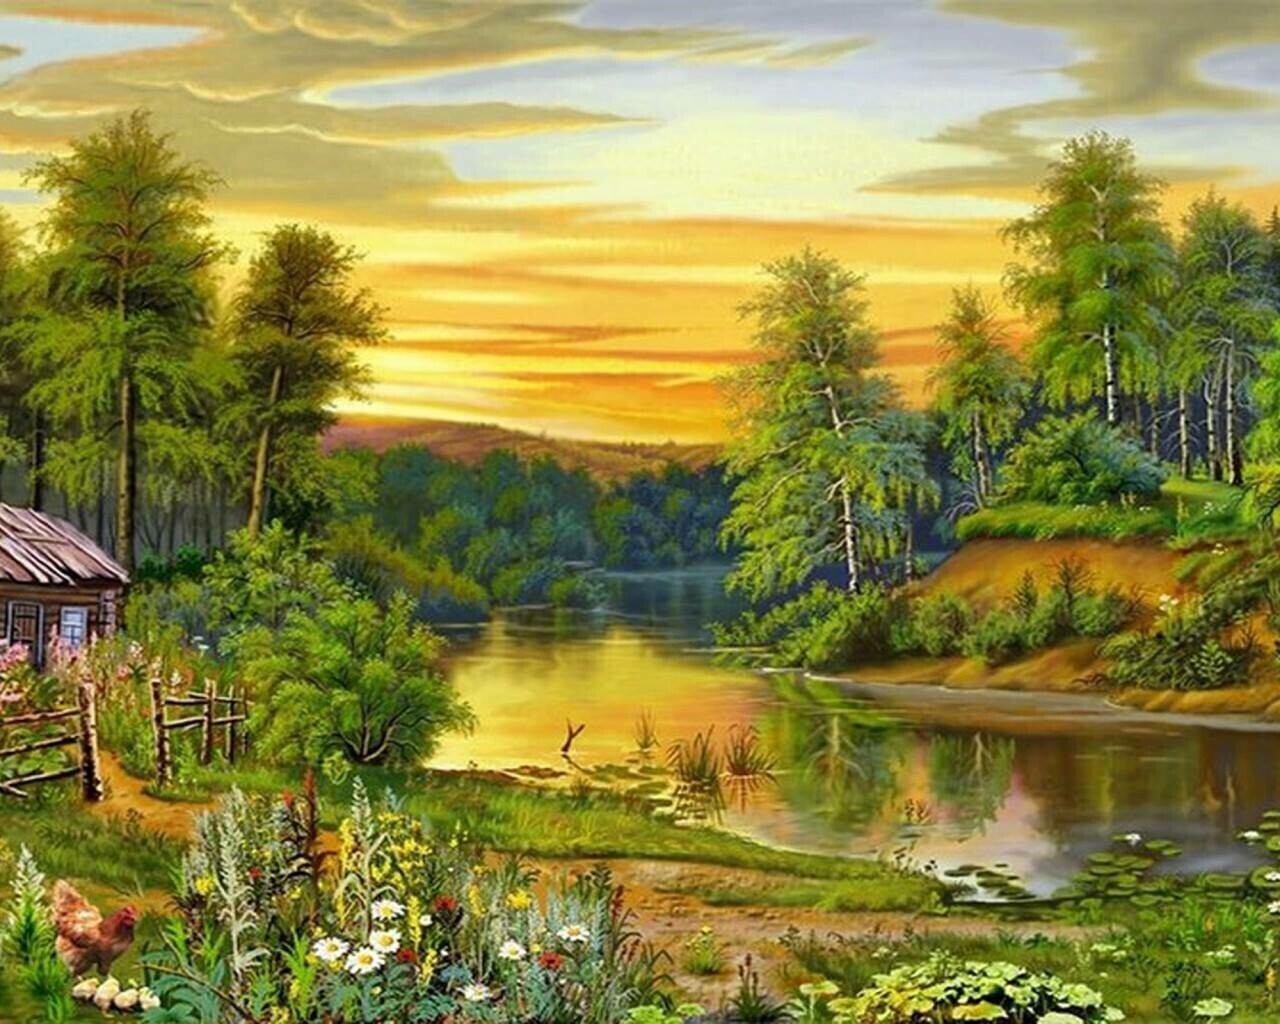 Scenery Artwork 06 - Specially ordered for you. Delivery is approximately 4 - 6 weeks.